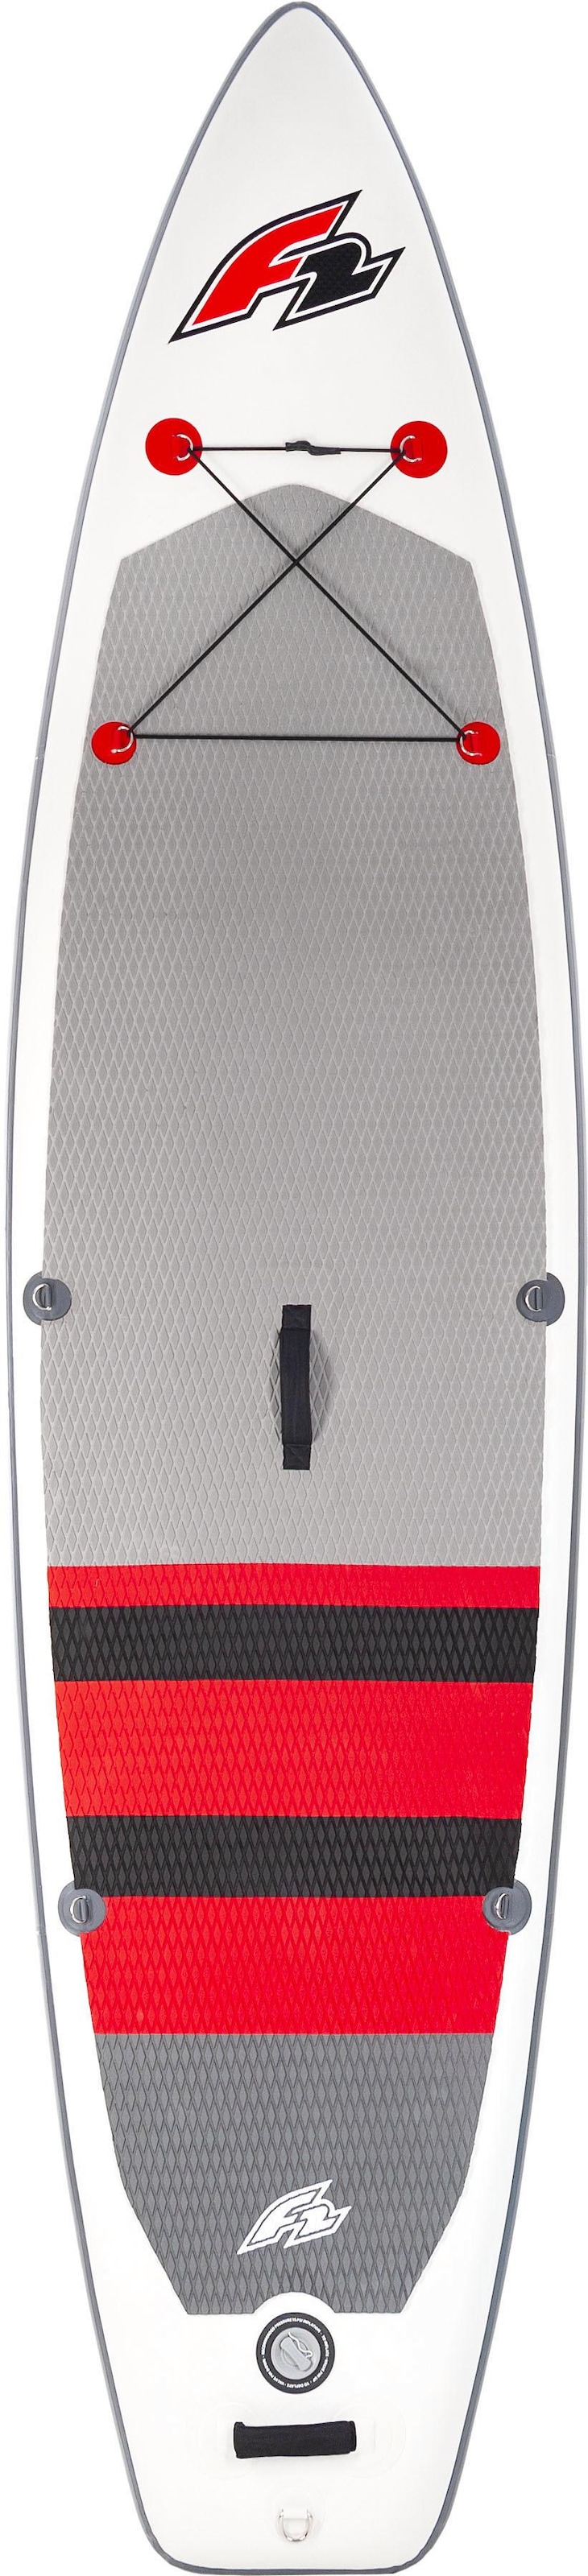 Up (Set, bei Stand 5 Inflatable Paddling tlg.), »Union 11,5«, F2 SUP-Board